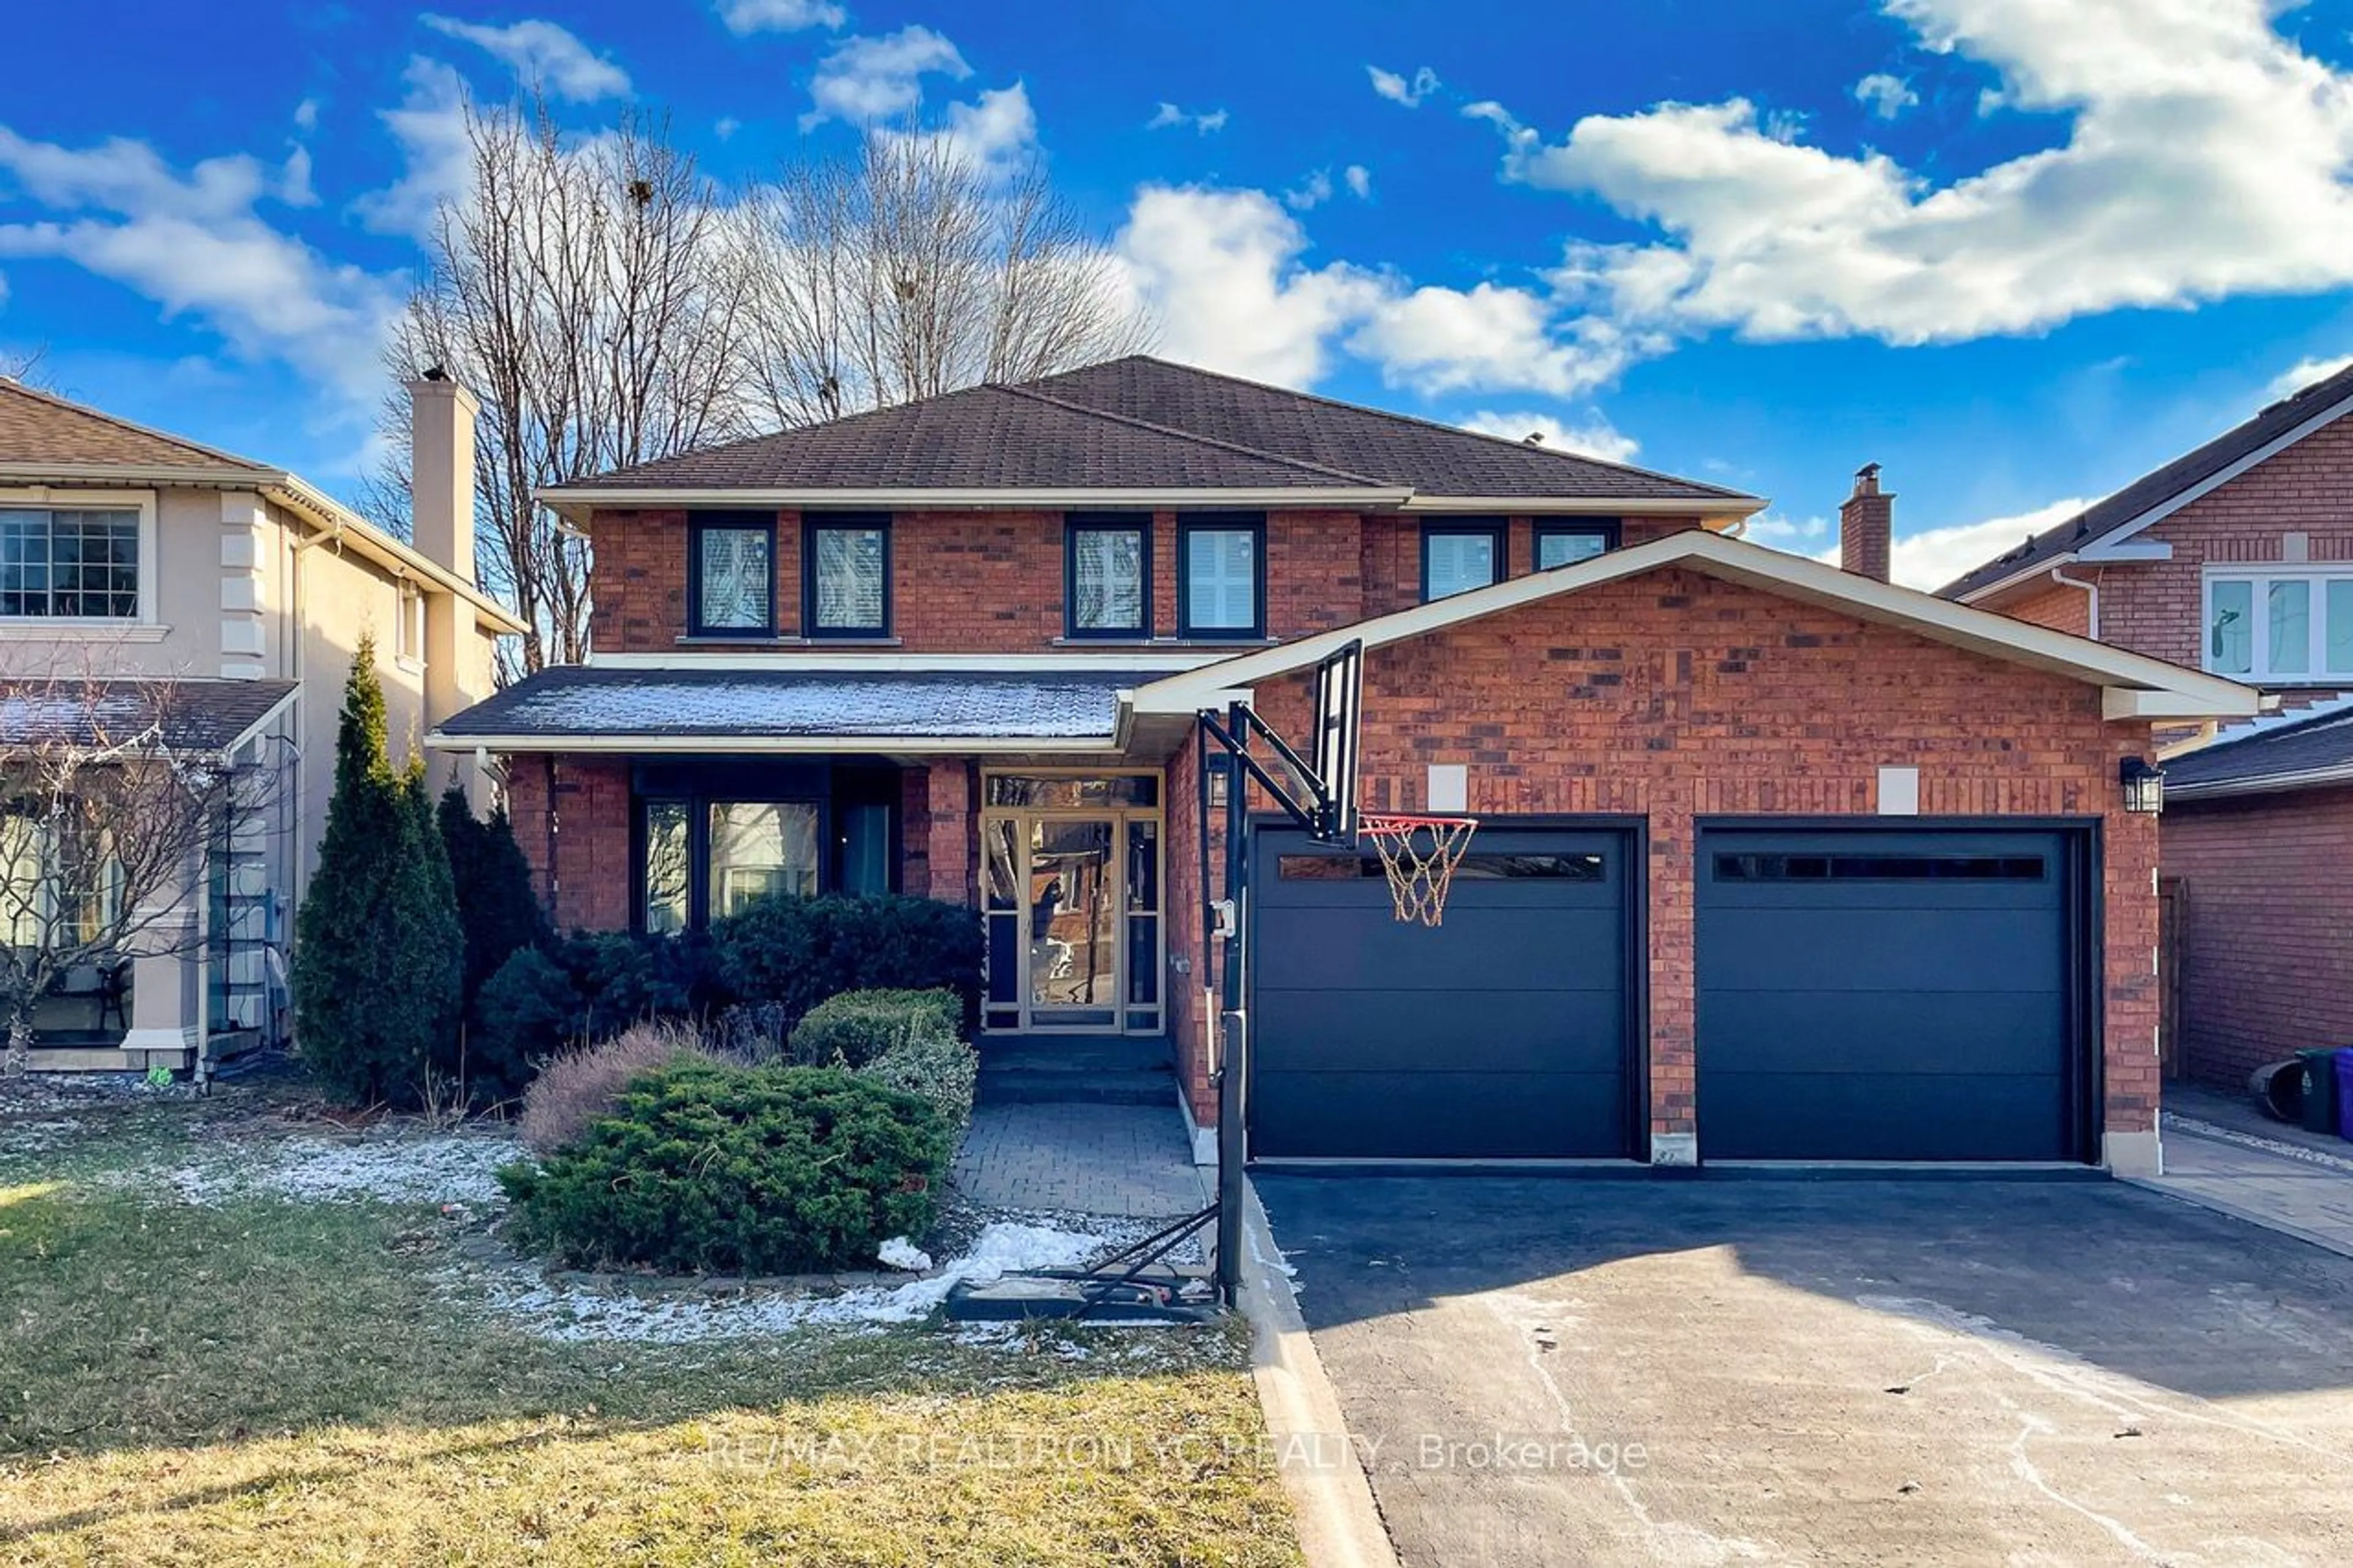 Home with brick exterior material for 83 Valleyway Cres, Vaughan Ontario L6A 1K8